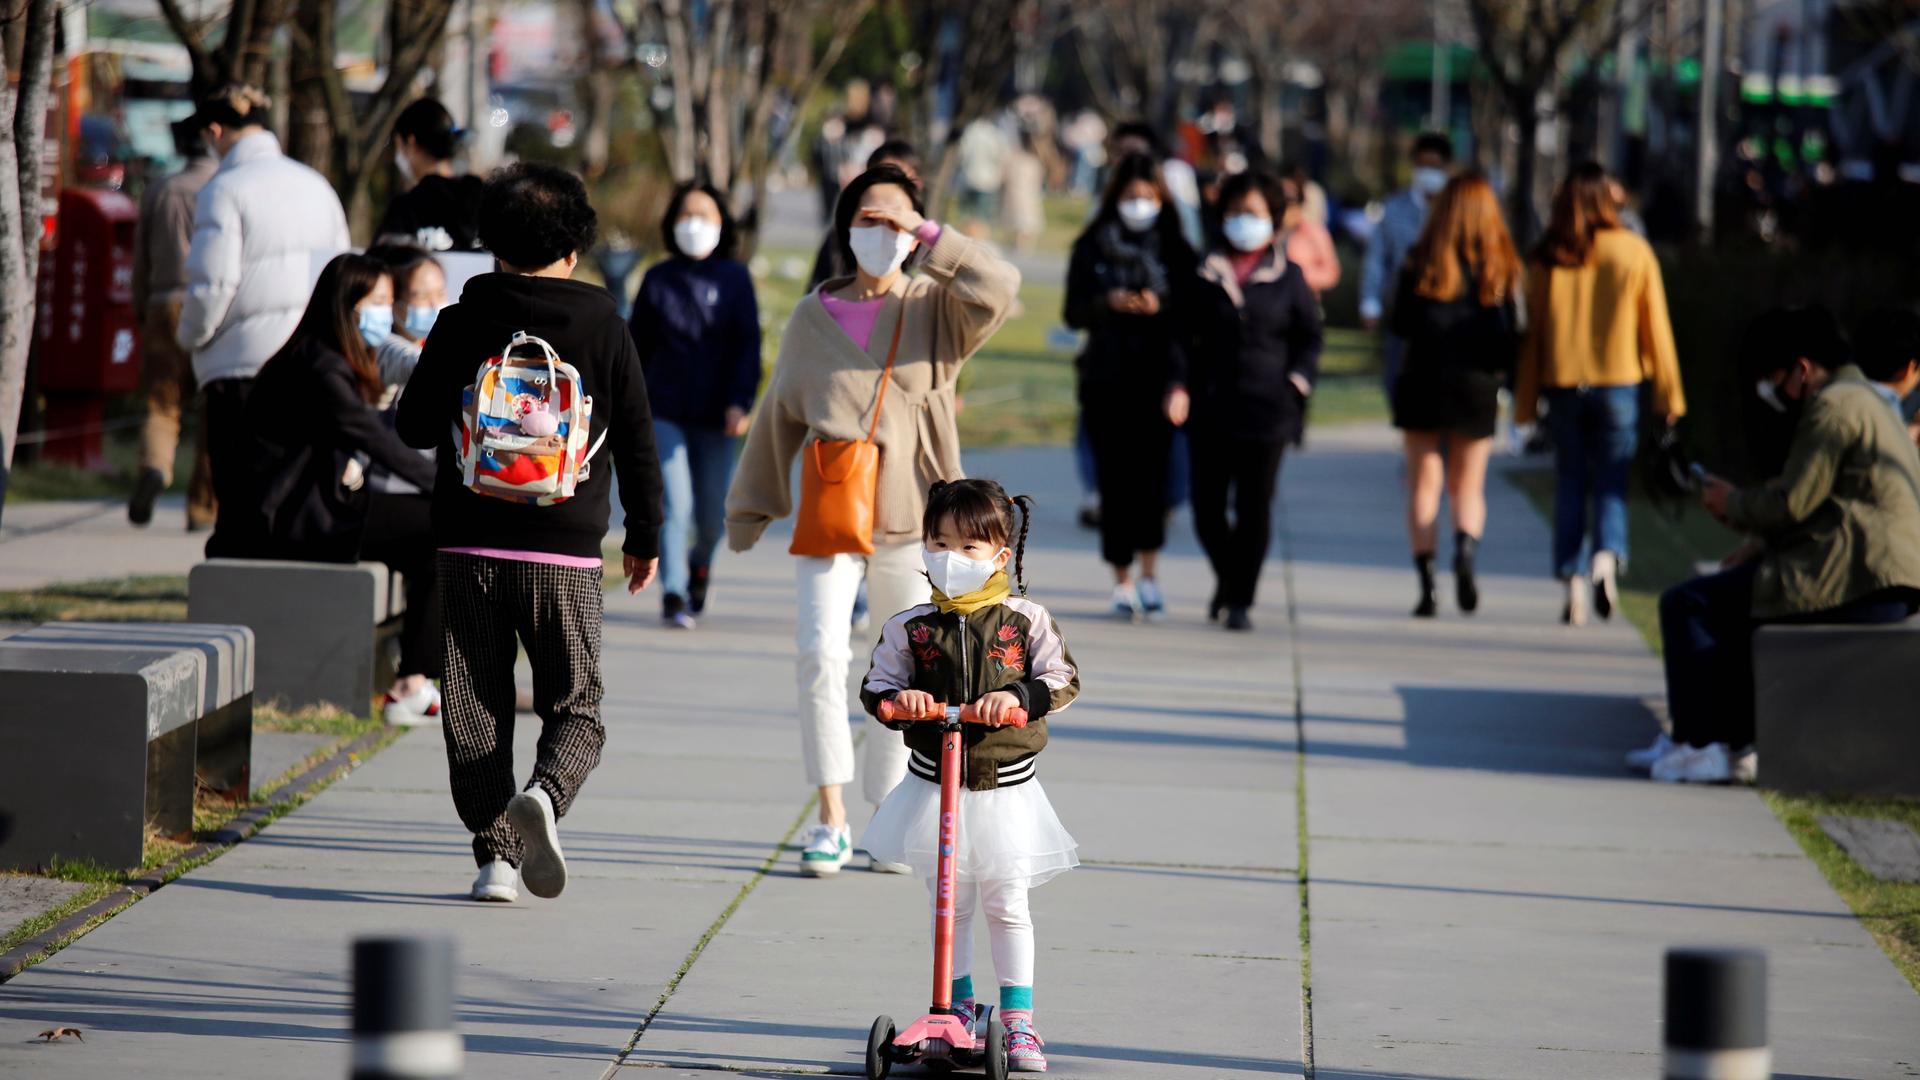 A girl wearing a protective face mask to prevent contracting the coronavirus disease (COVID-19) rides a toy kick scooter at a park in Seoul, South Korea, April 3, 2020. 